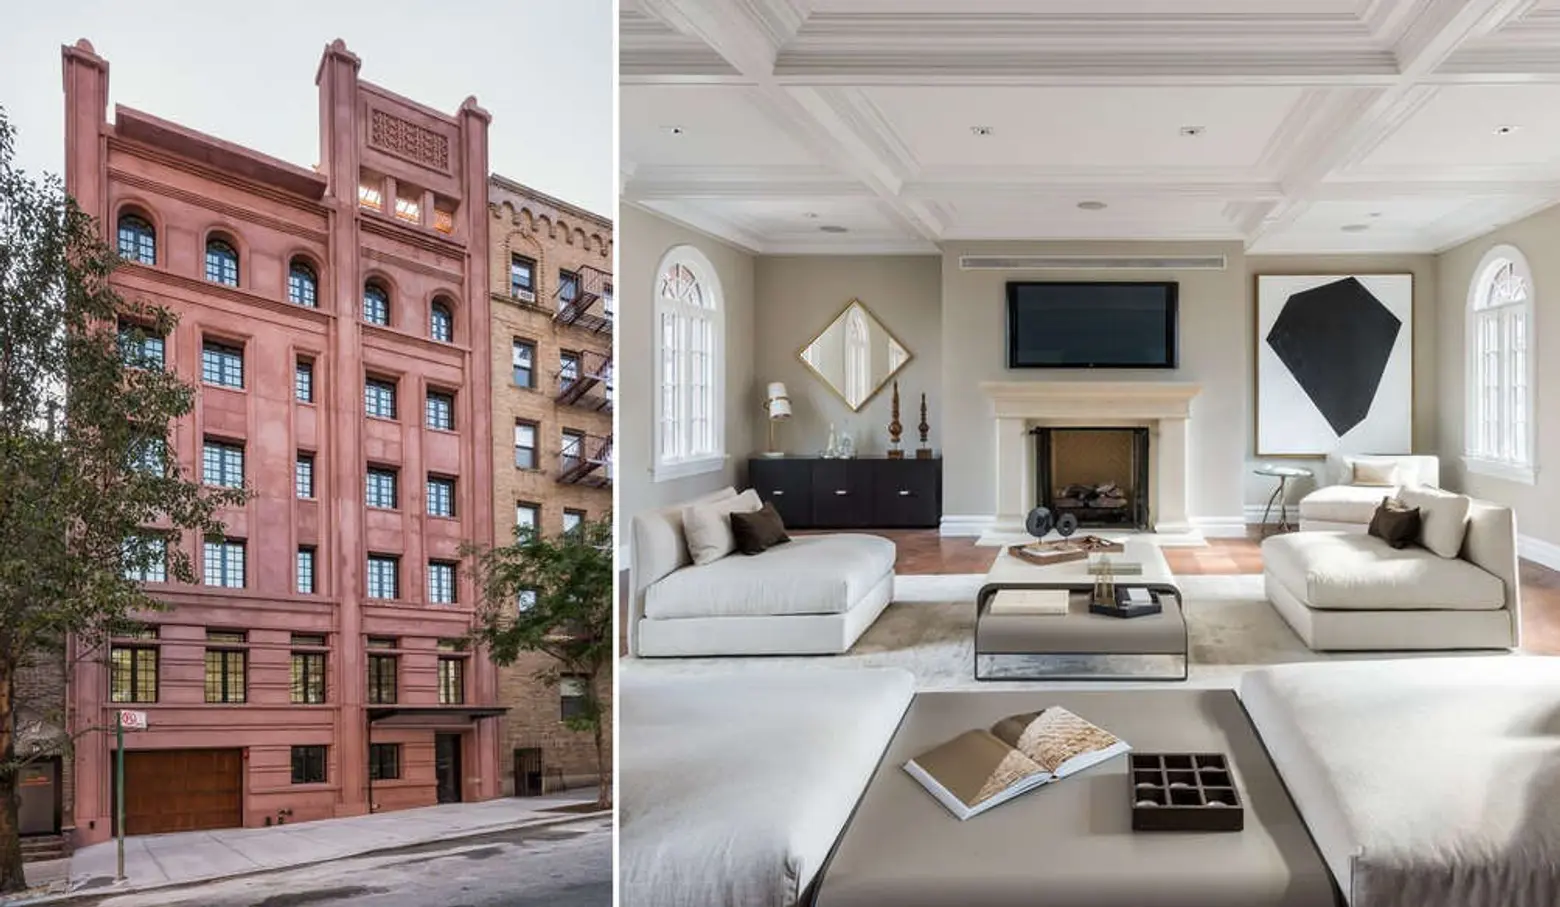 Interview: Daniel Kohs of SYNTHESIS on designing a brand-new Carnegie Hill mansion